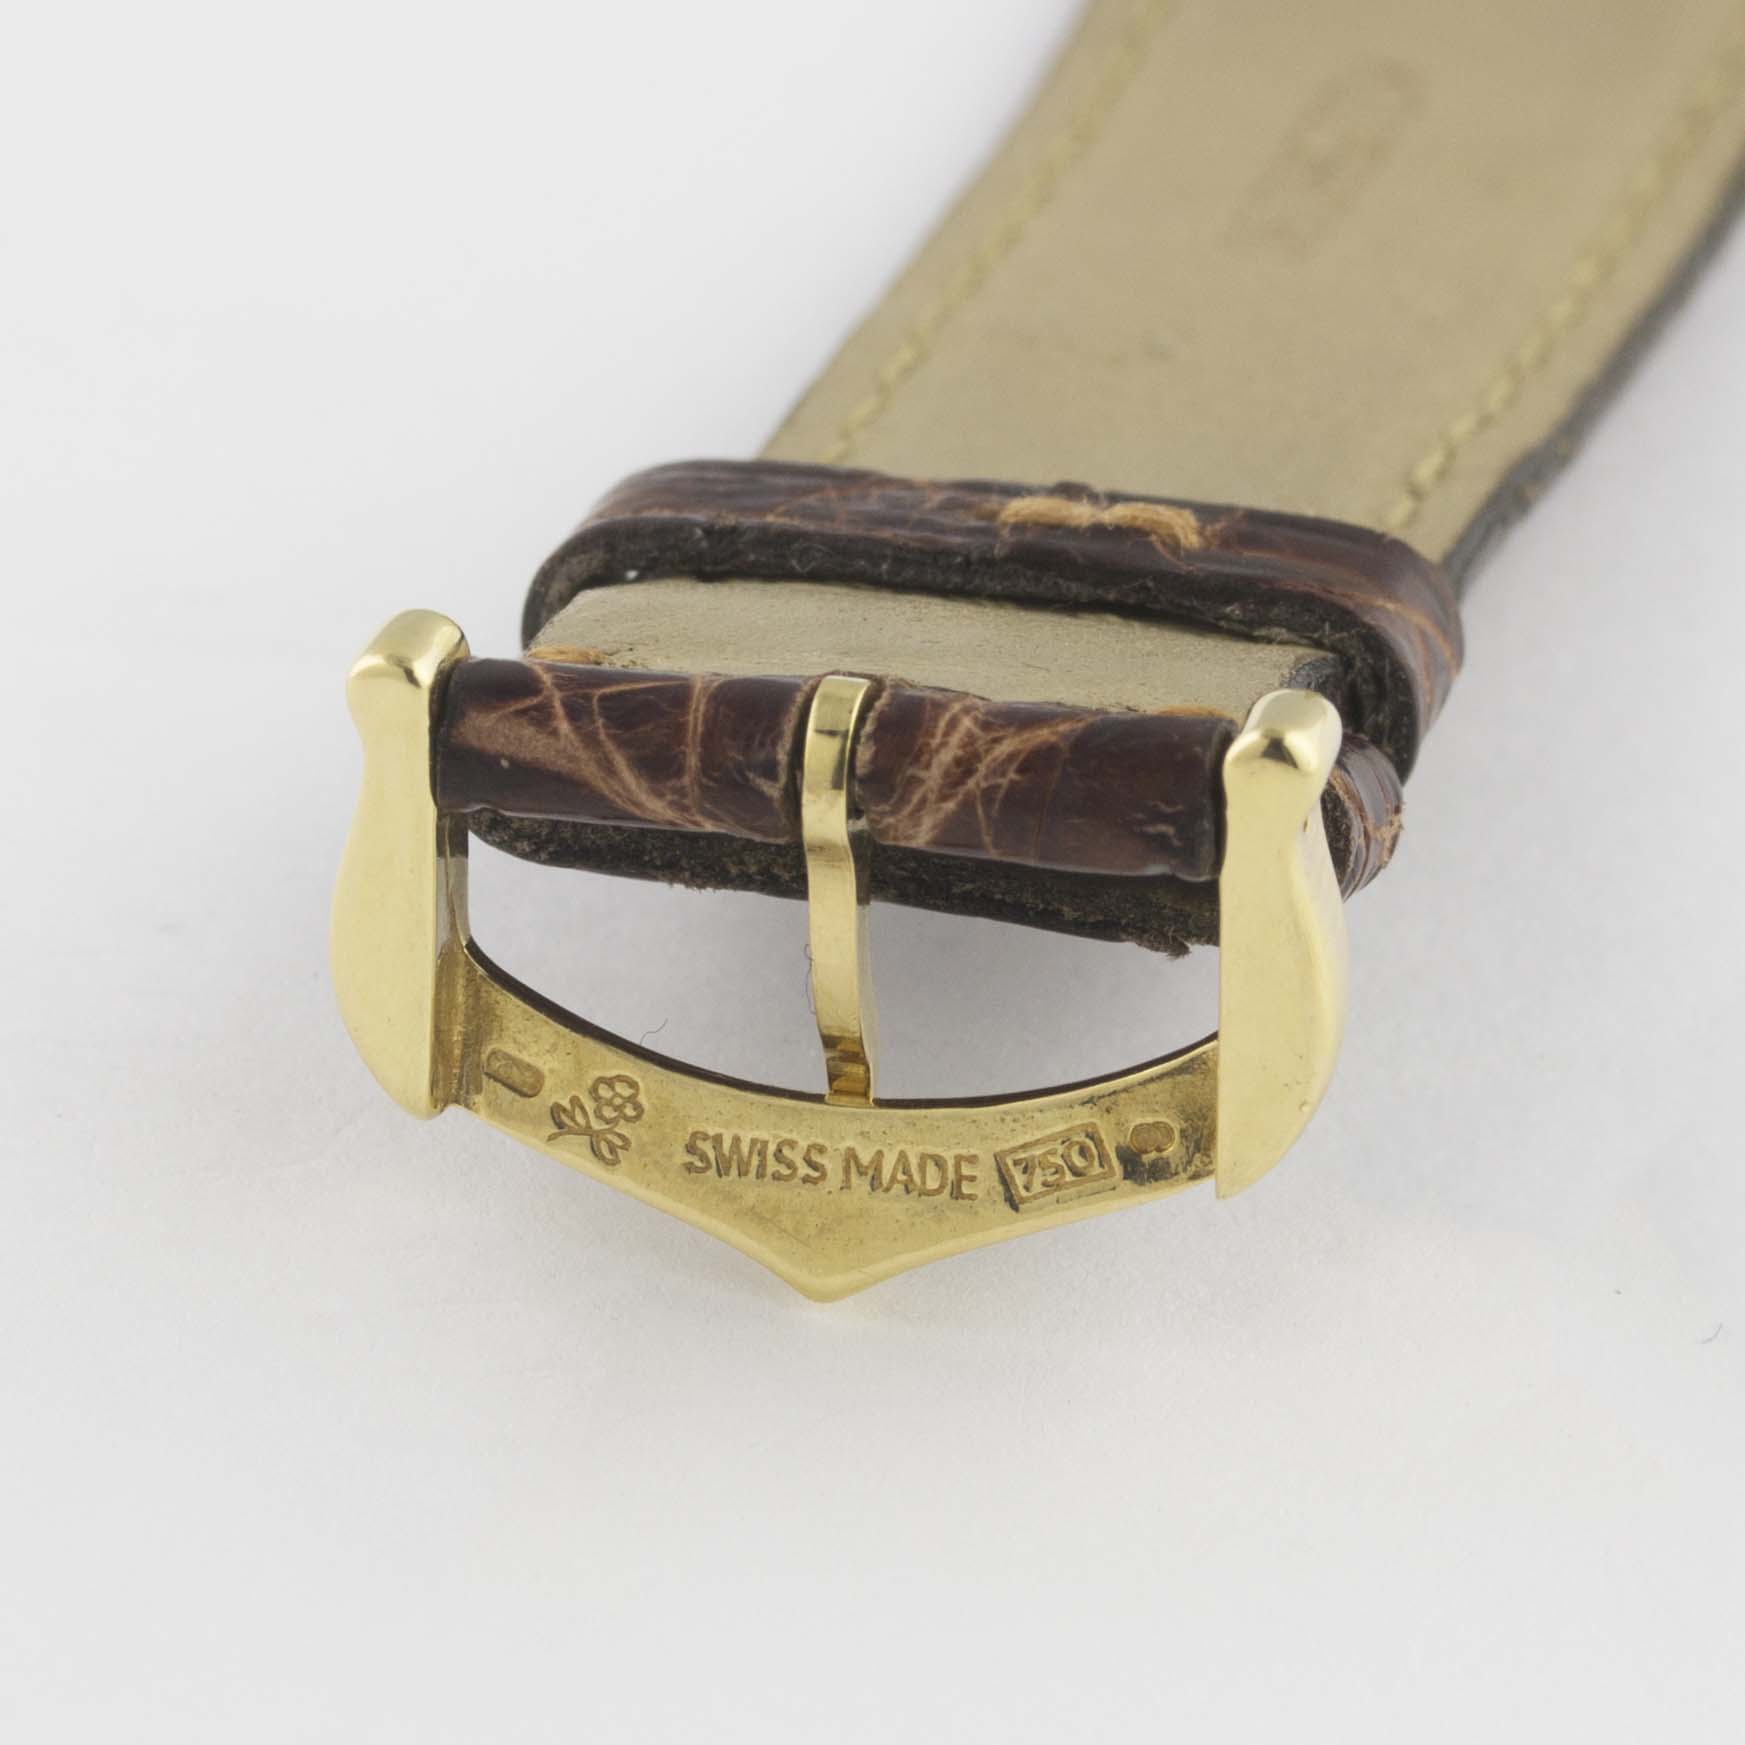 A RARE GENTLEMAN'S 18K SOLID GOLD CARTIER TANK NORMALE WRIST WATCH CIRCA 1960, WITH CARTIER BOX - Image 12 of 12